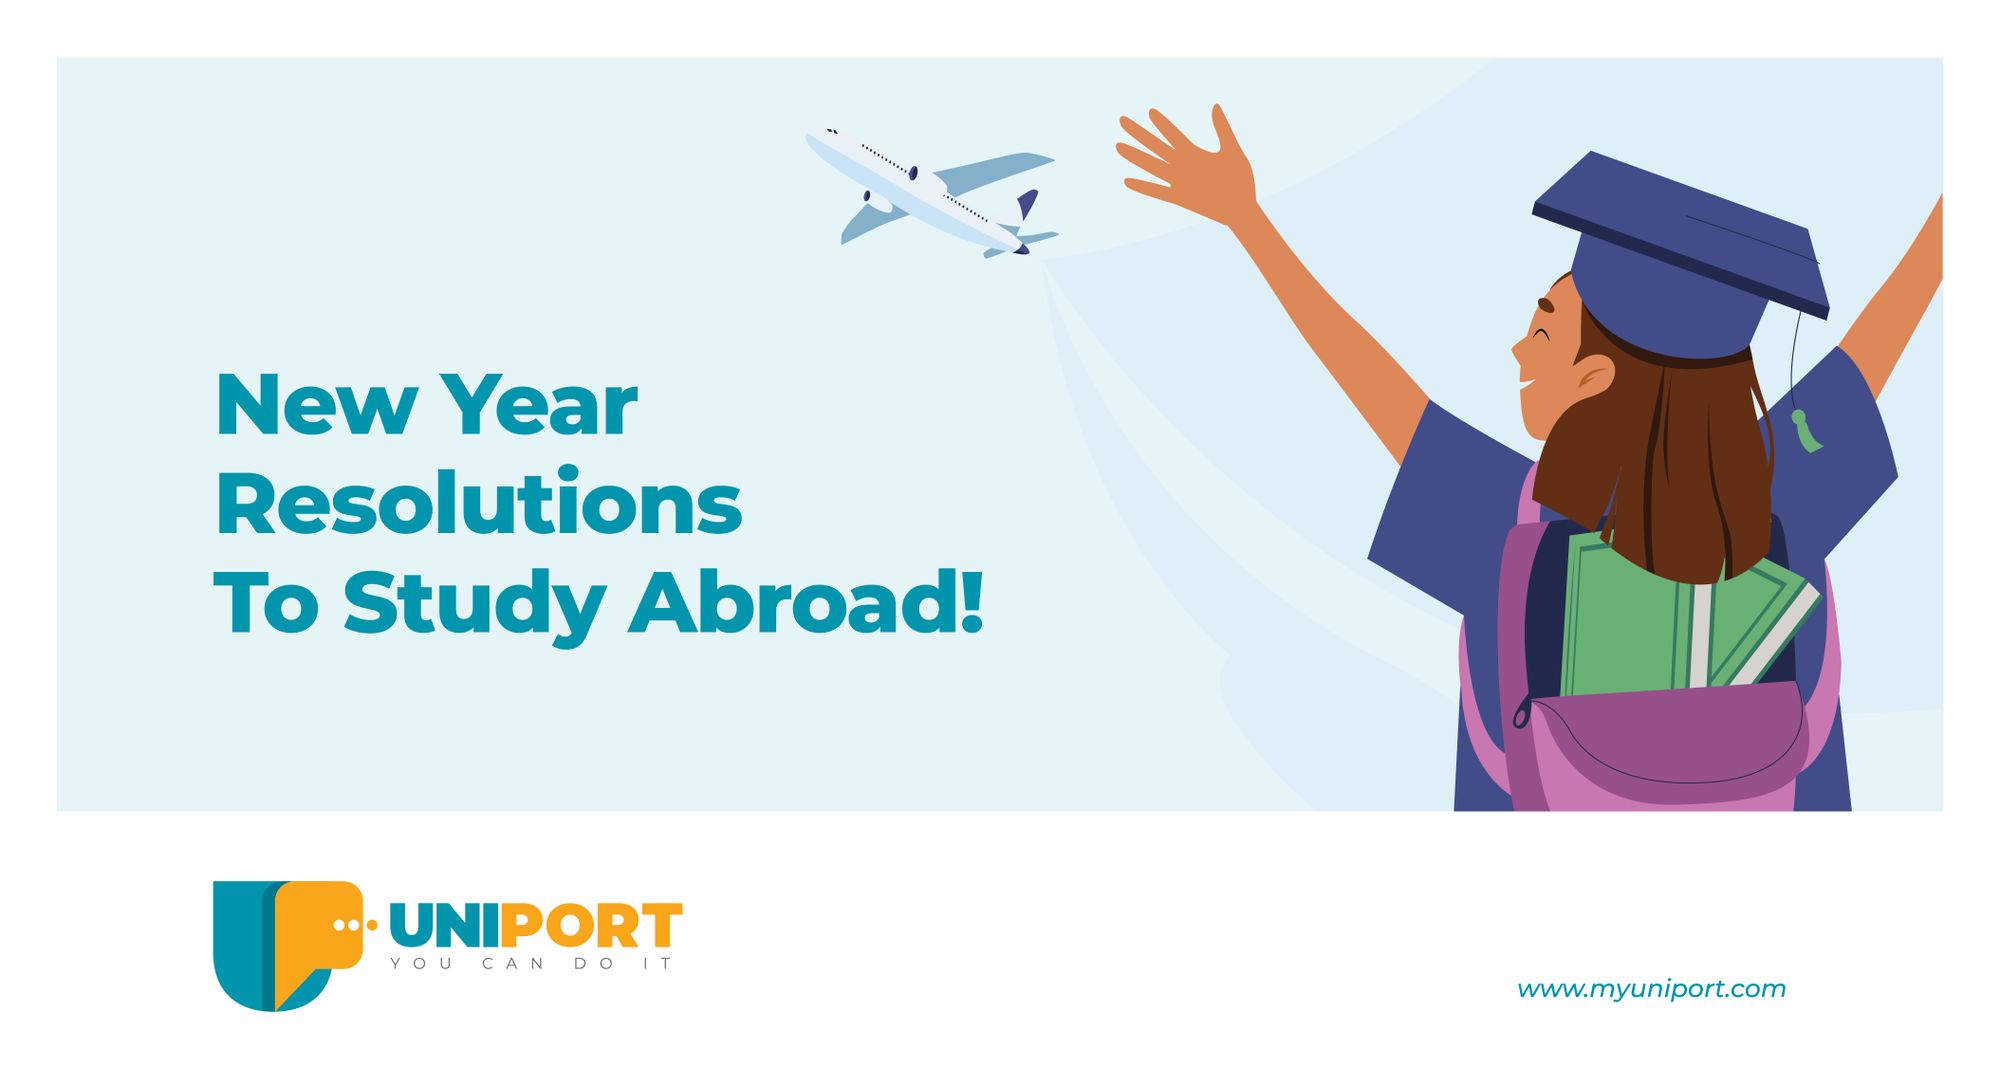 New Year Resolutions To Study Abroad!